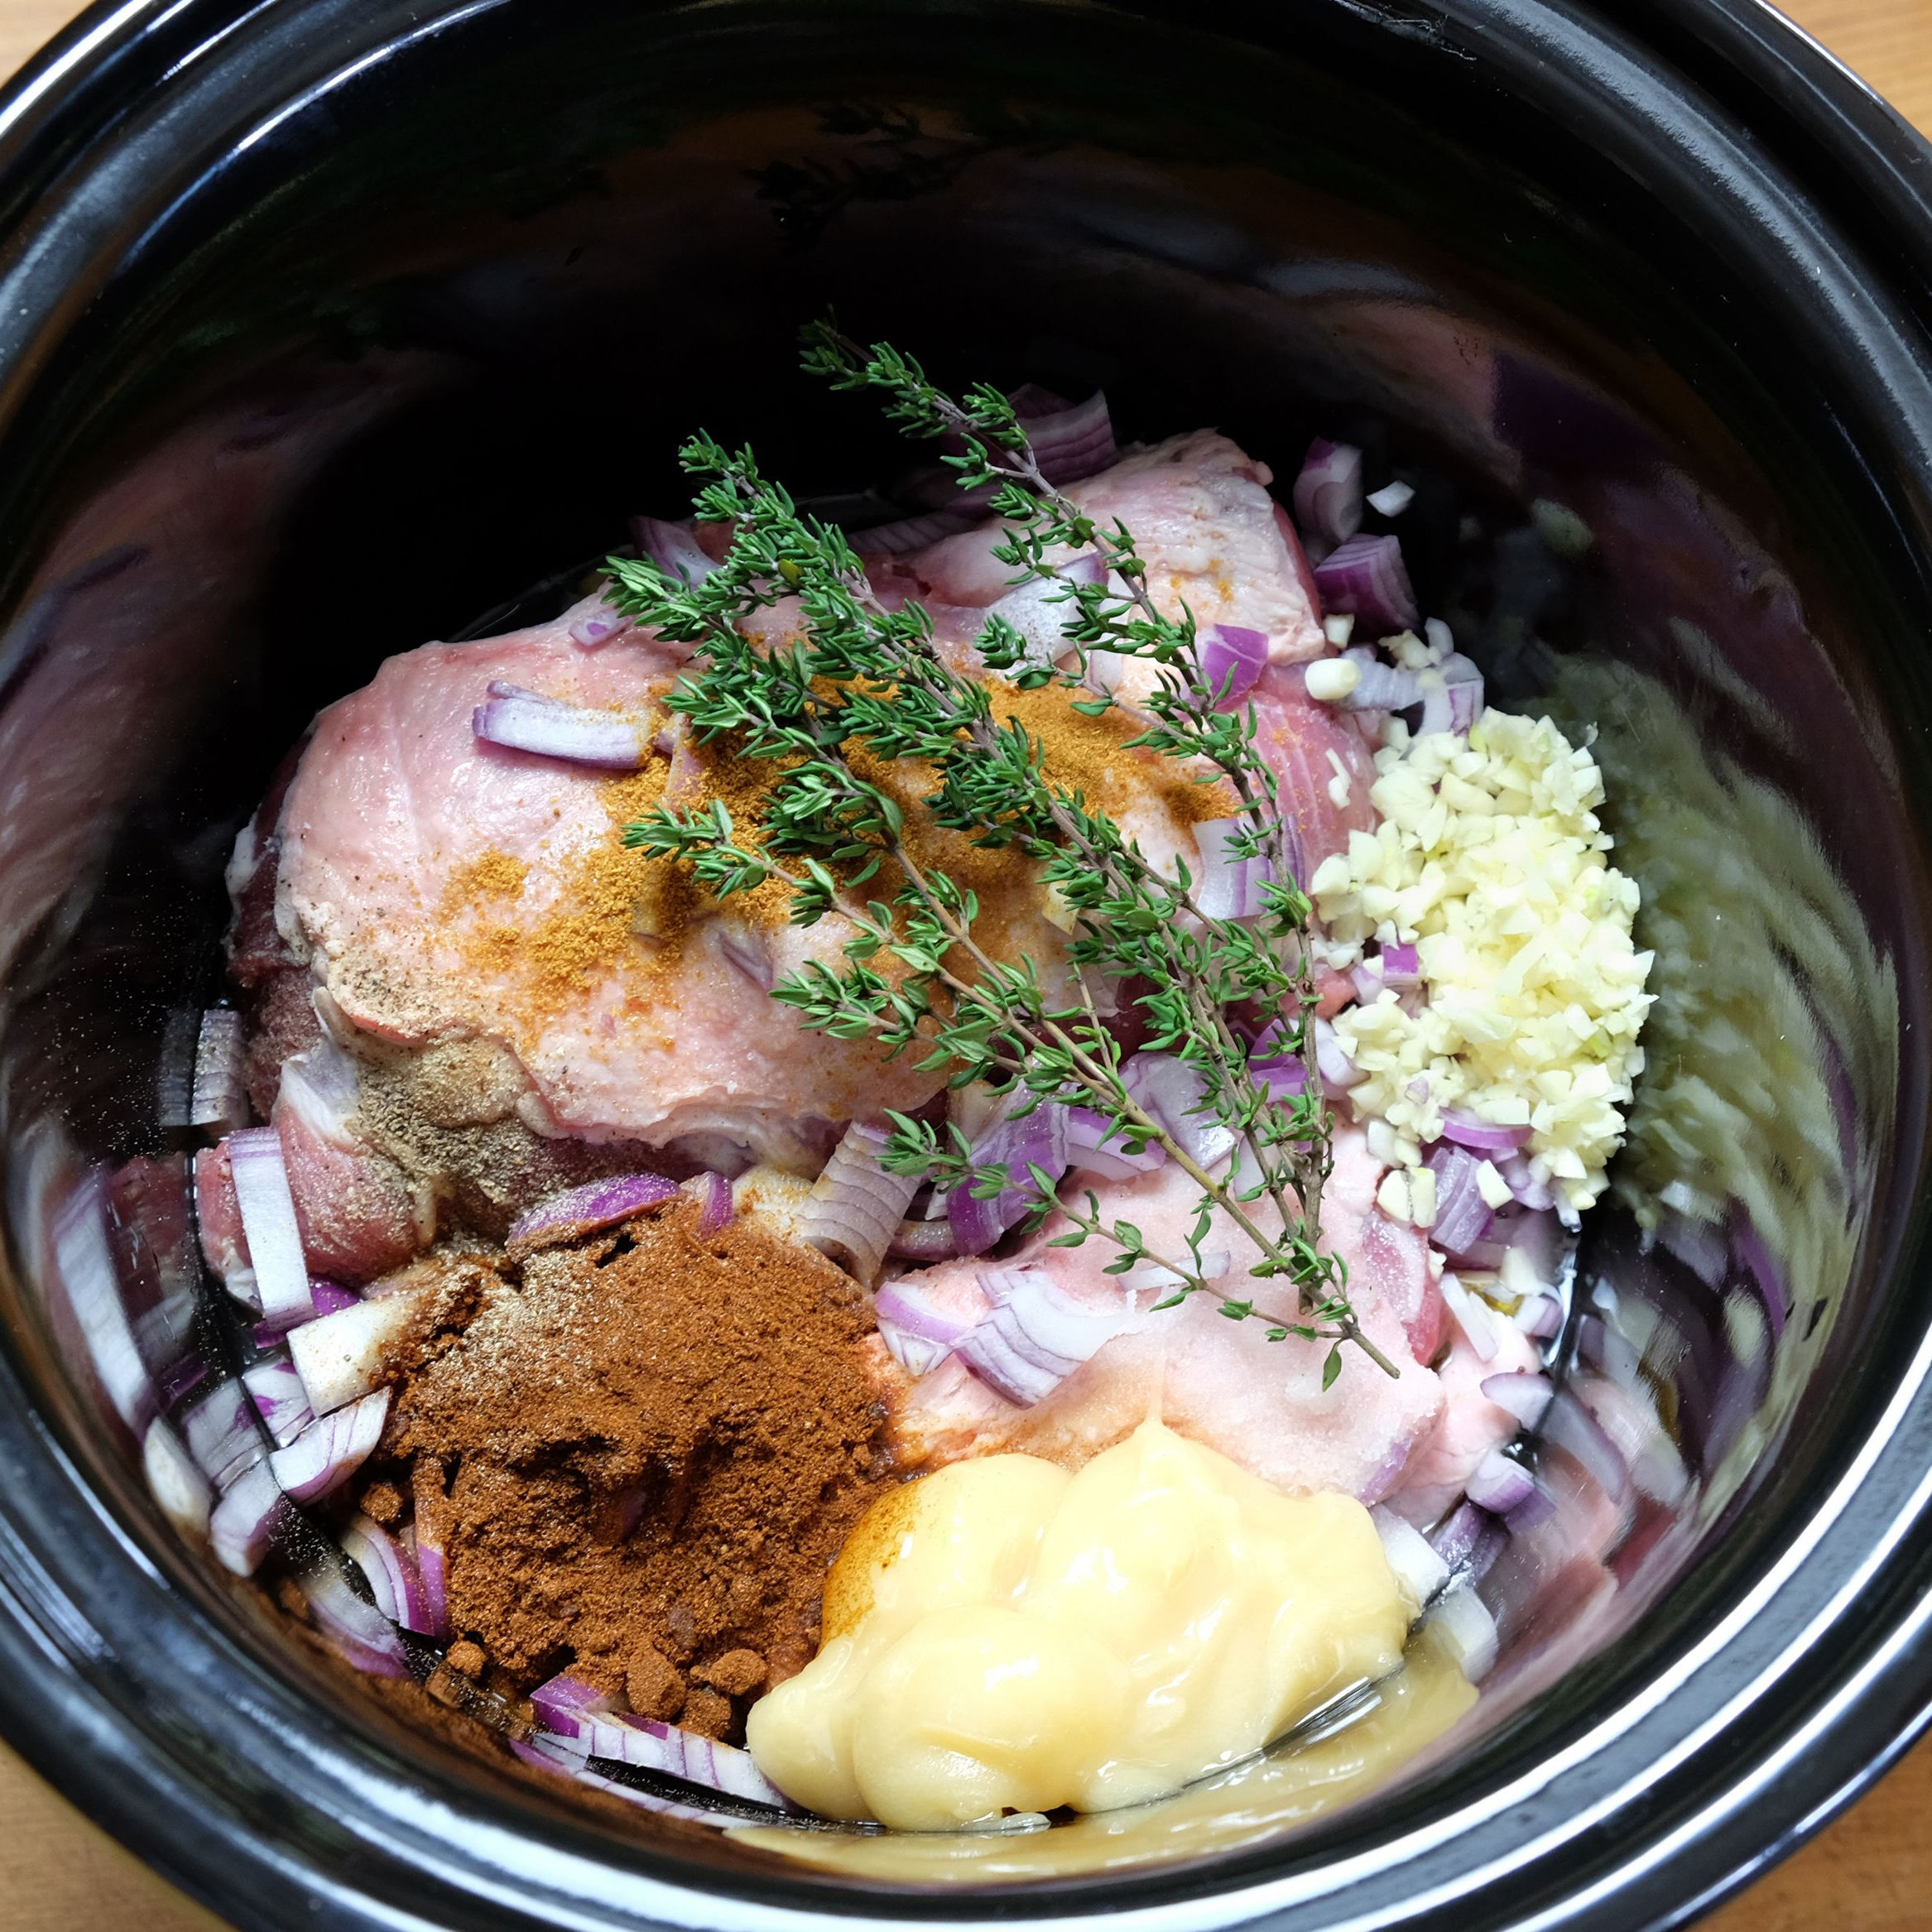 pork and seasoning and herbs in a slow cooker